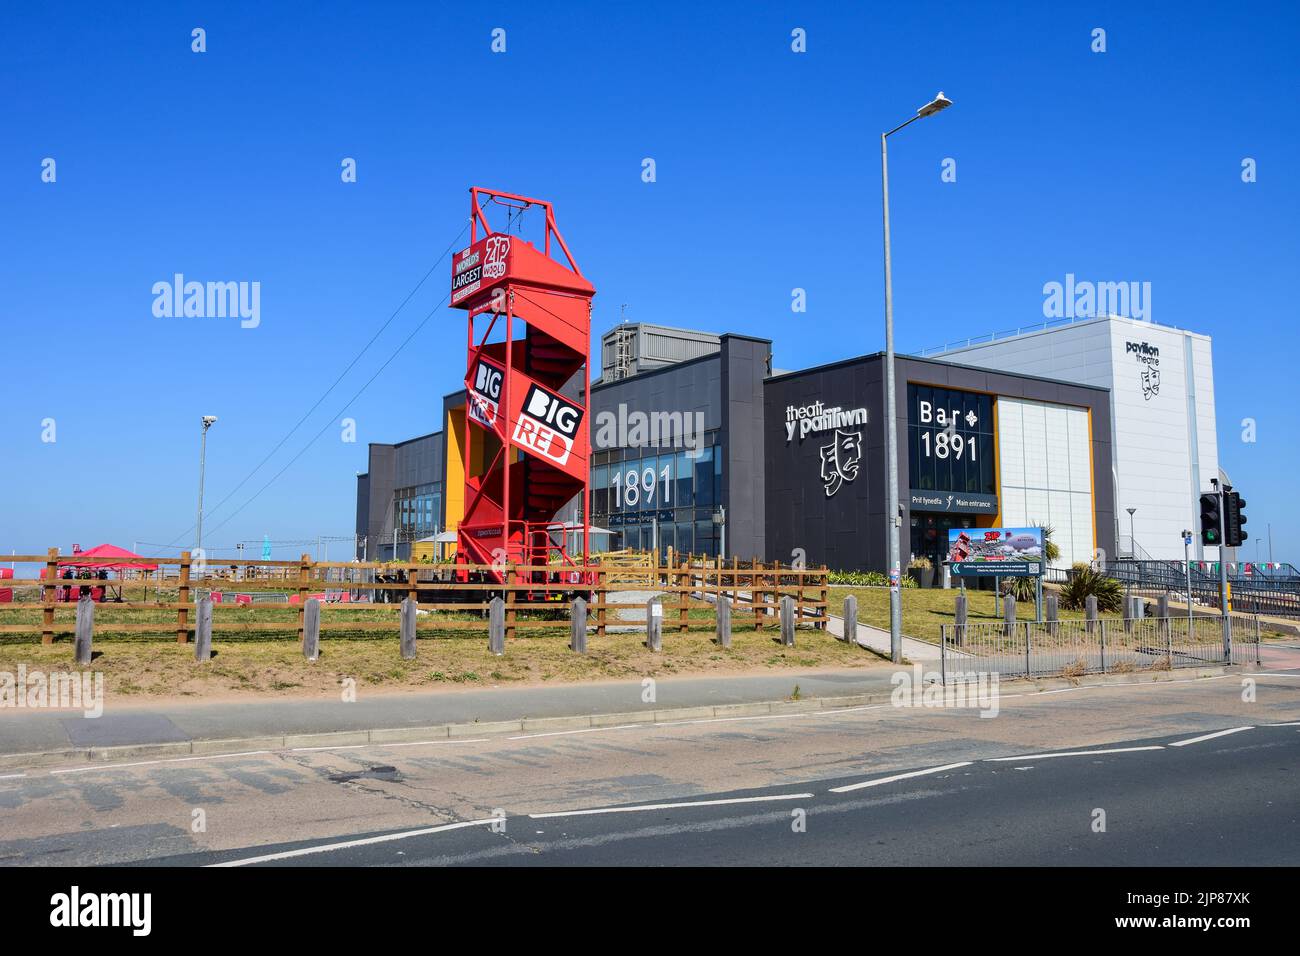 Rhyl, UK: Aug 11, 2022: The world's largest mobile zip line is located beside the Pavilion Theatre Stock Photo